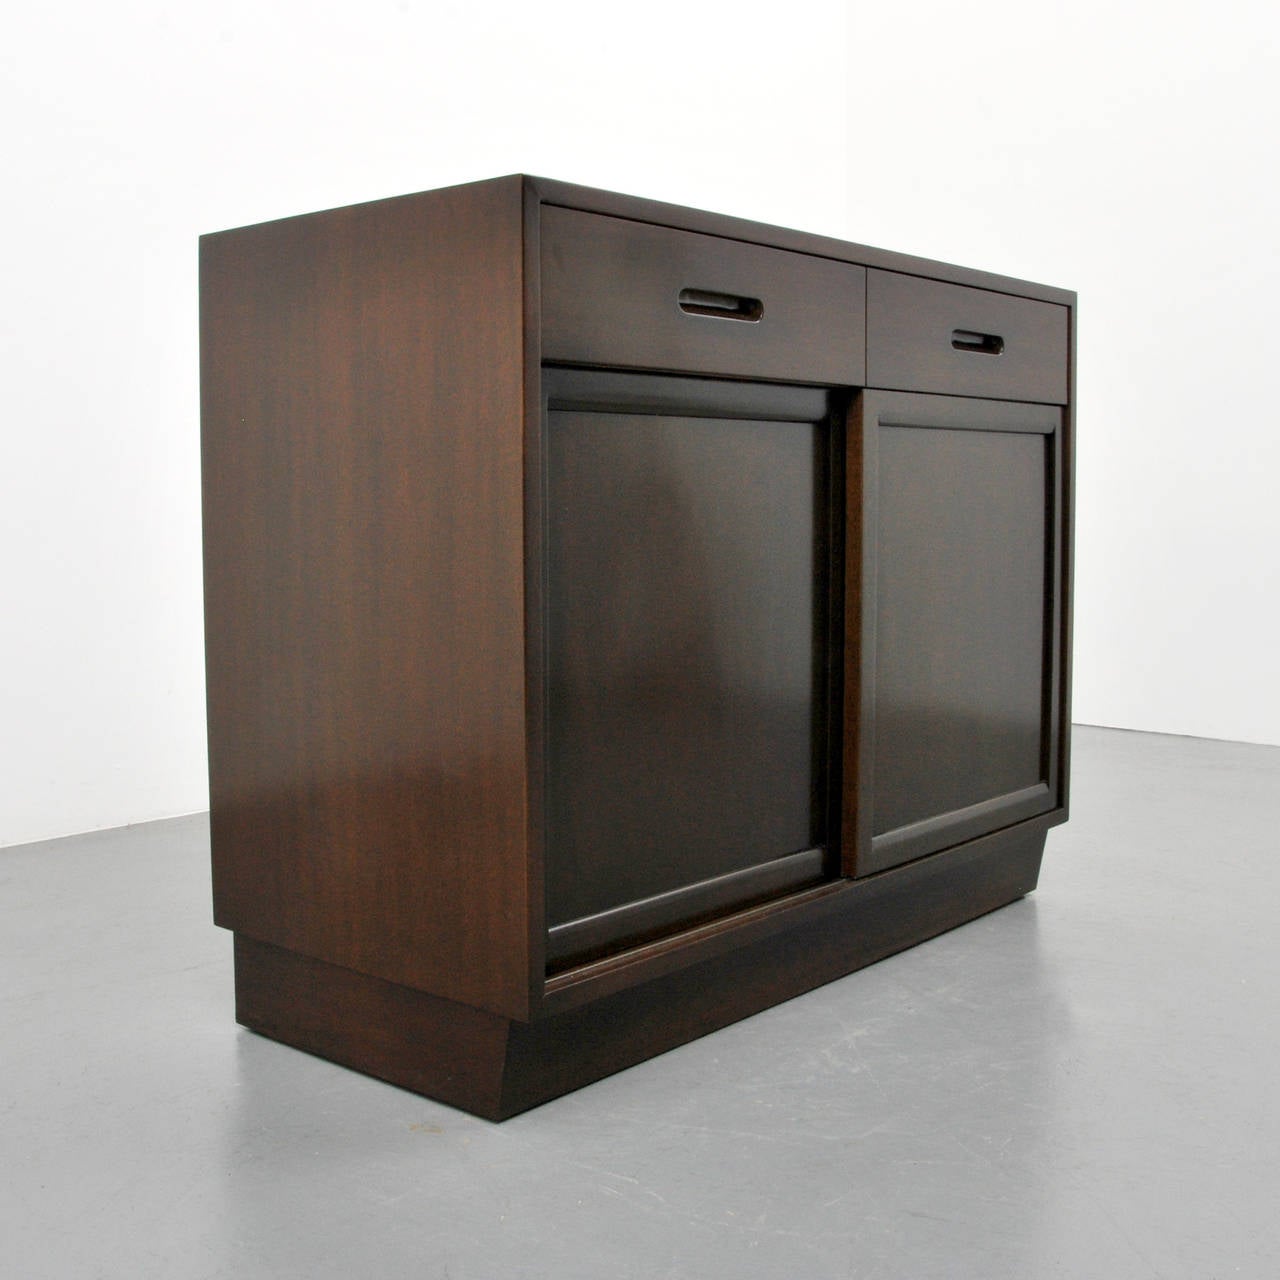 Cabinet/server/buffet is a variation of model 5668 and features a finished back, two drawers with separators, two doors each revealing three pull-out shelves and storage. Reference (similar form): Dunbar fine furniture of the 1950s, preface by